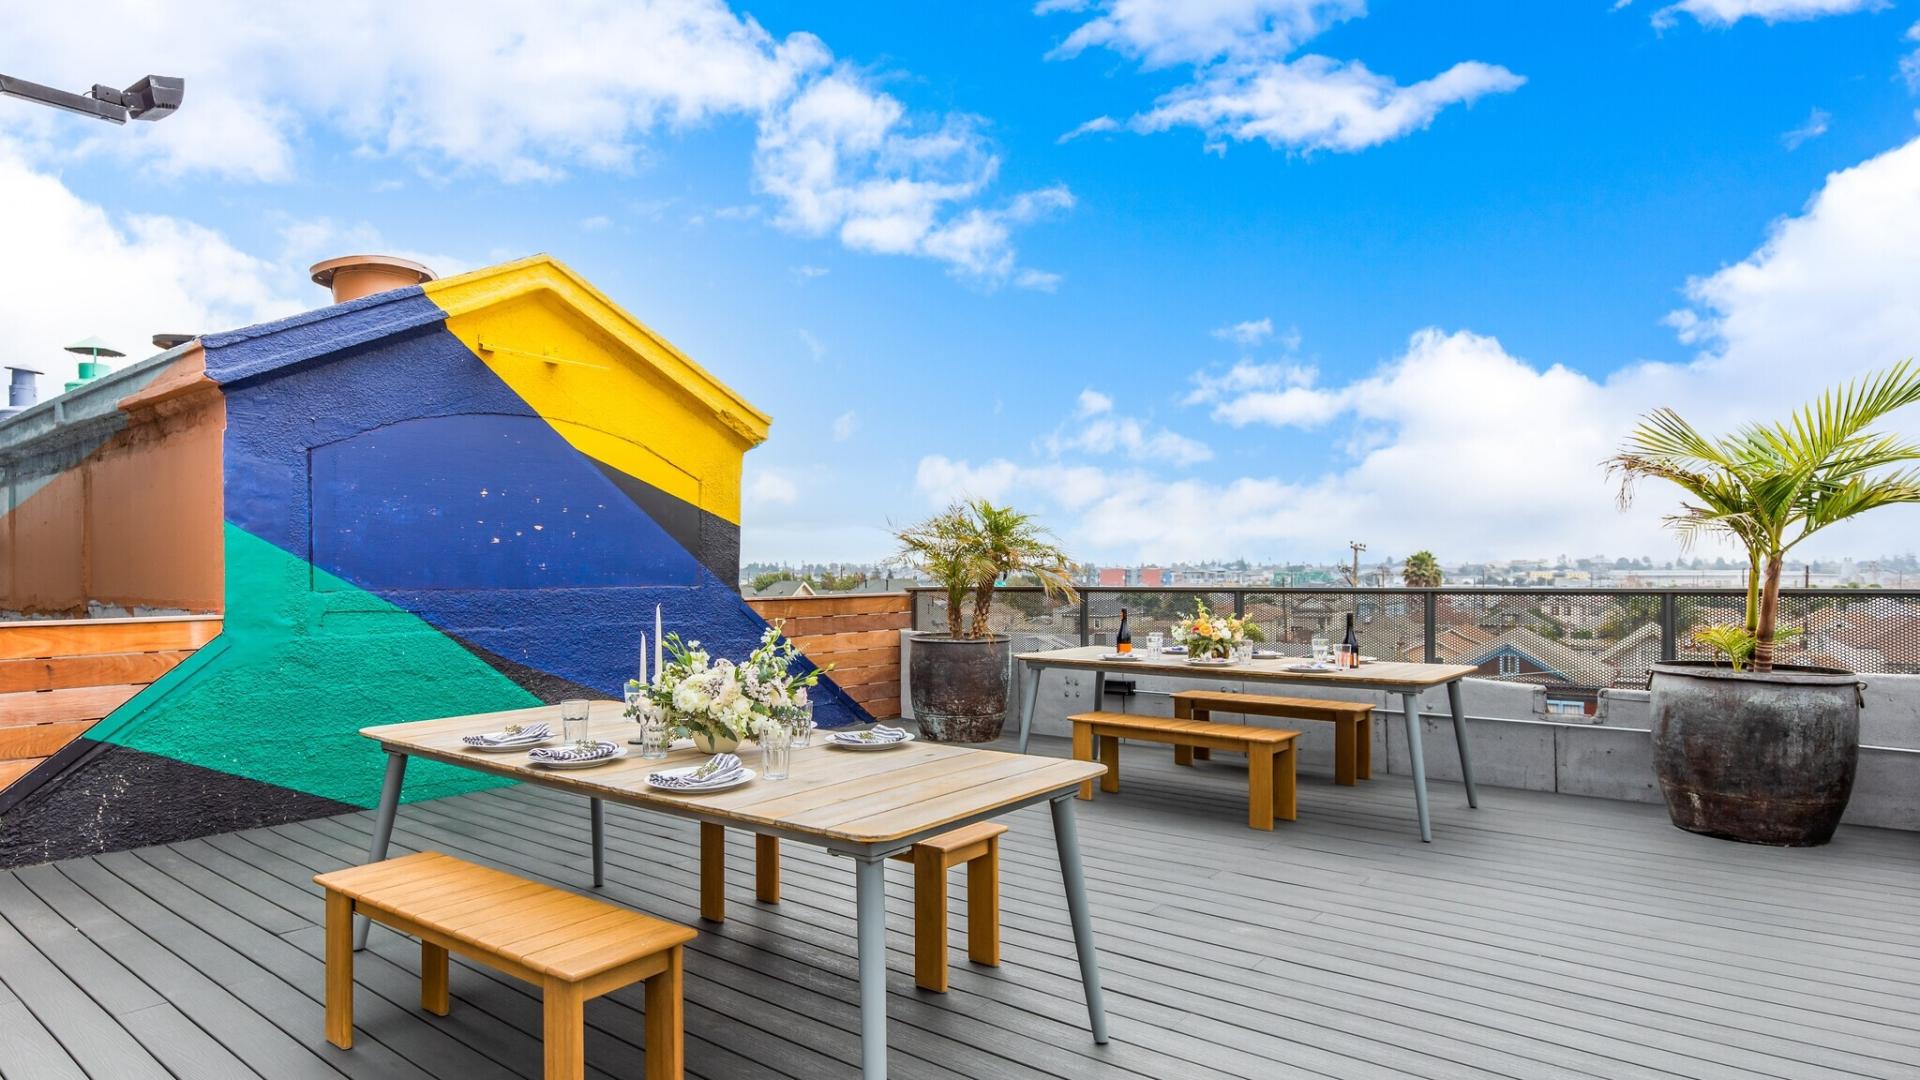 Rooftop Venues for Rent in San Francisco, CA